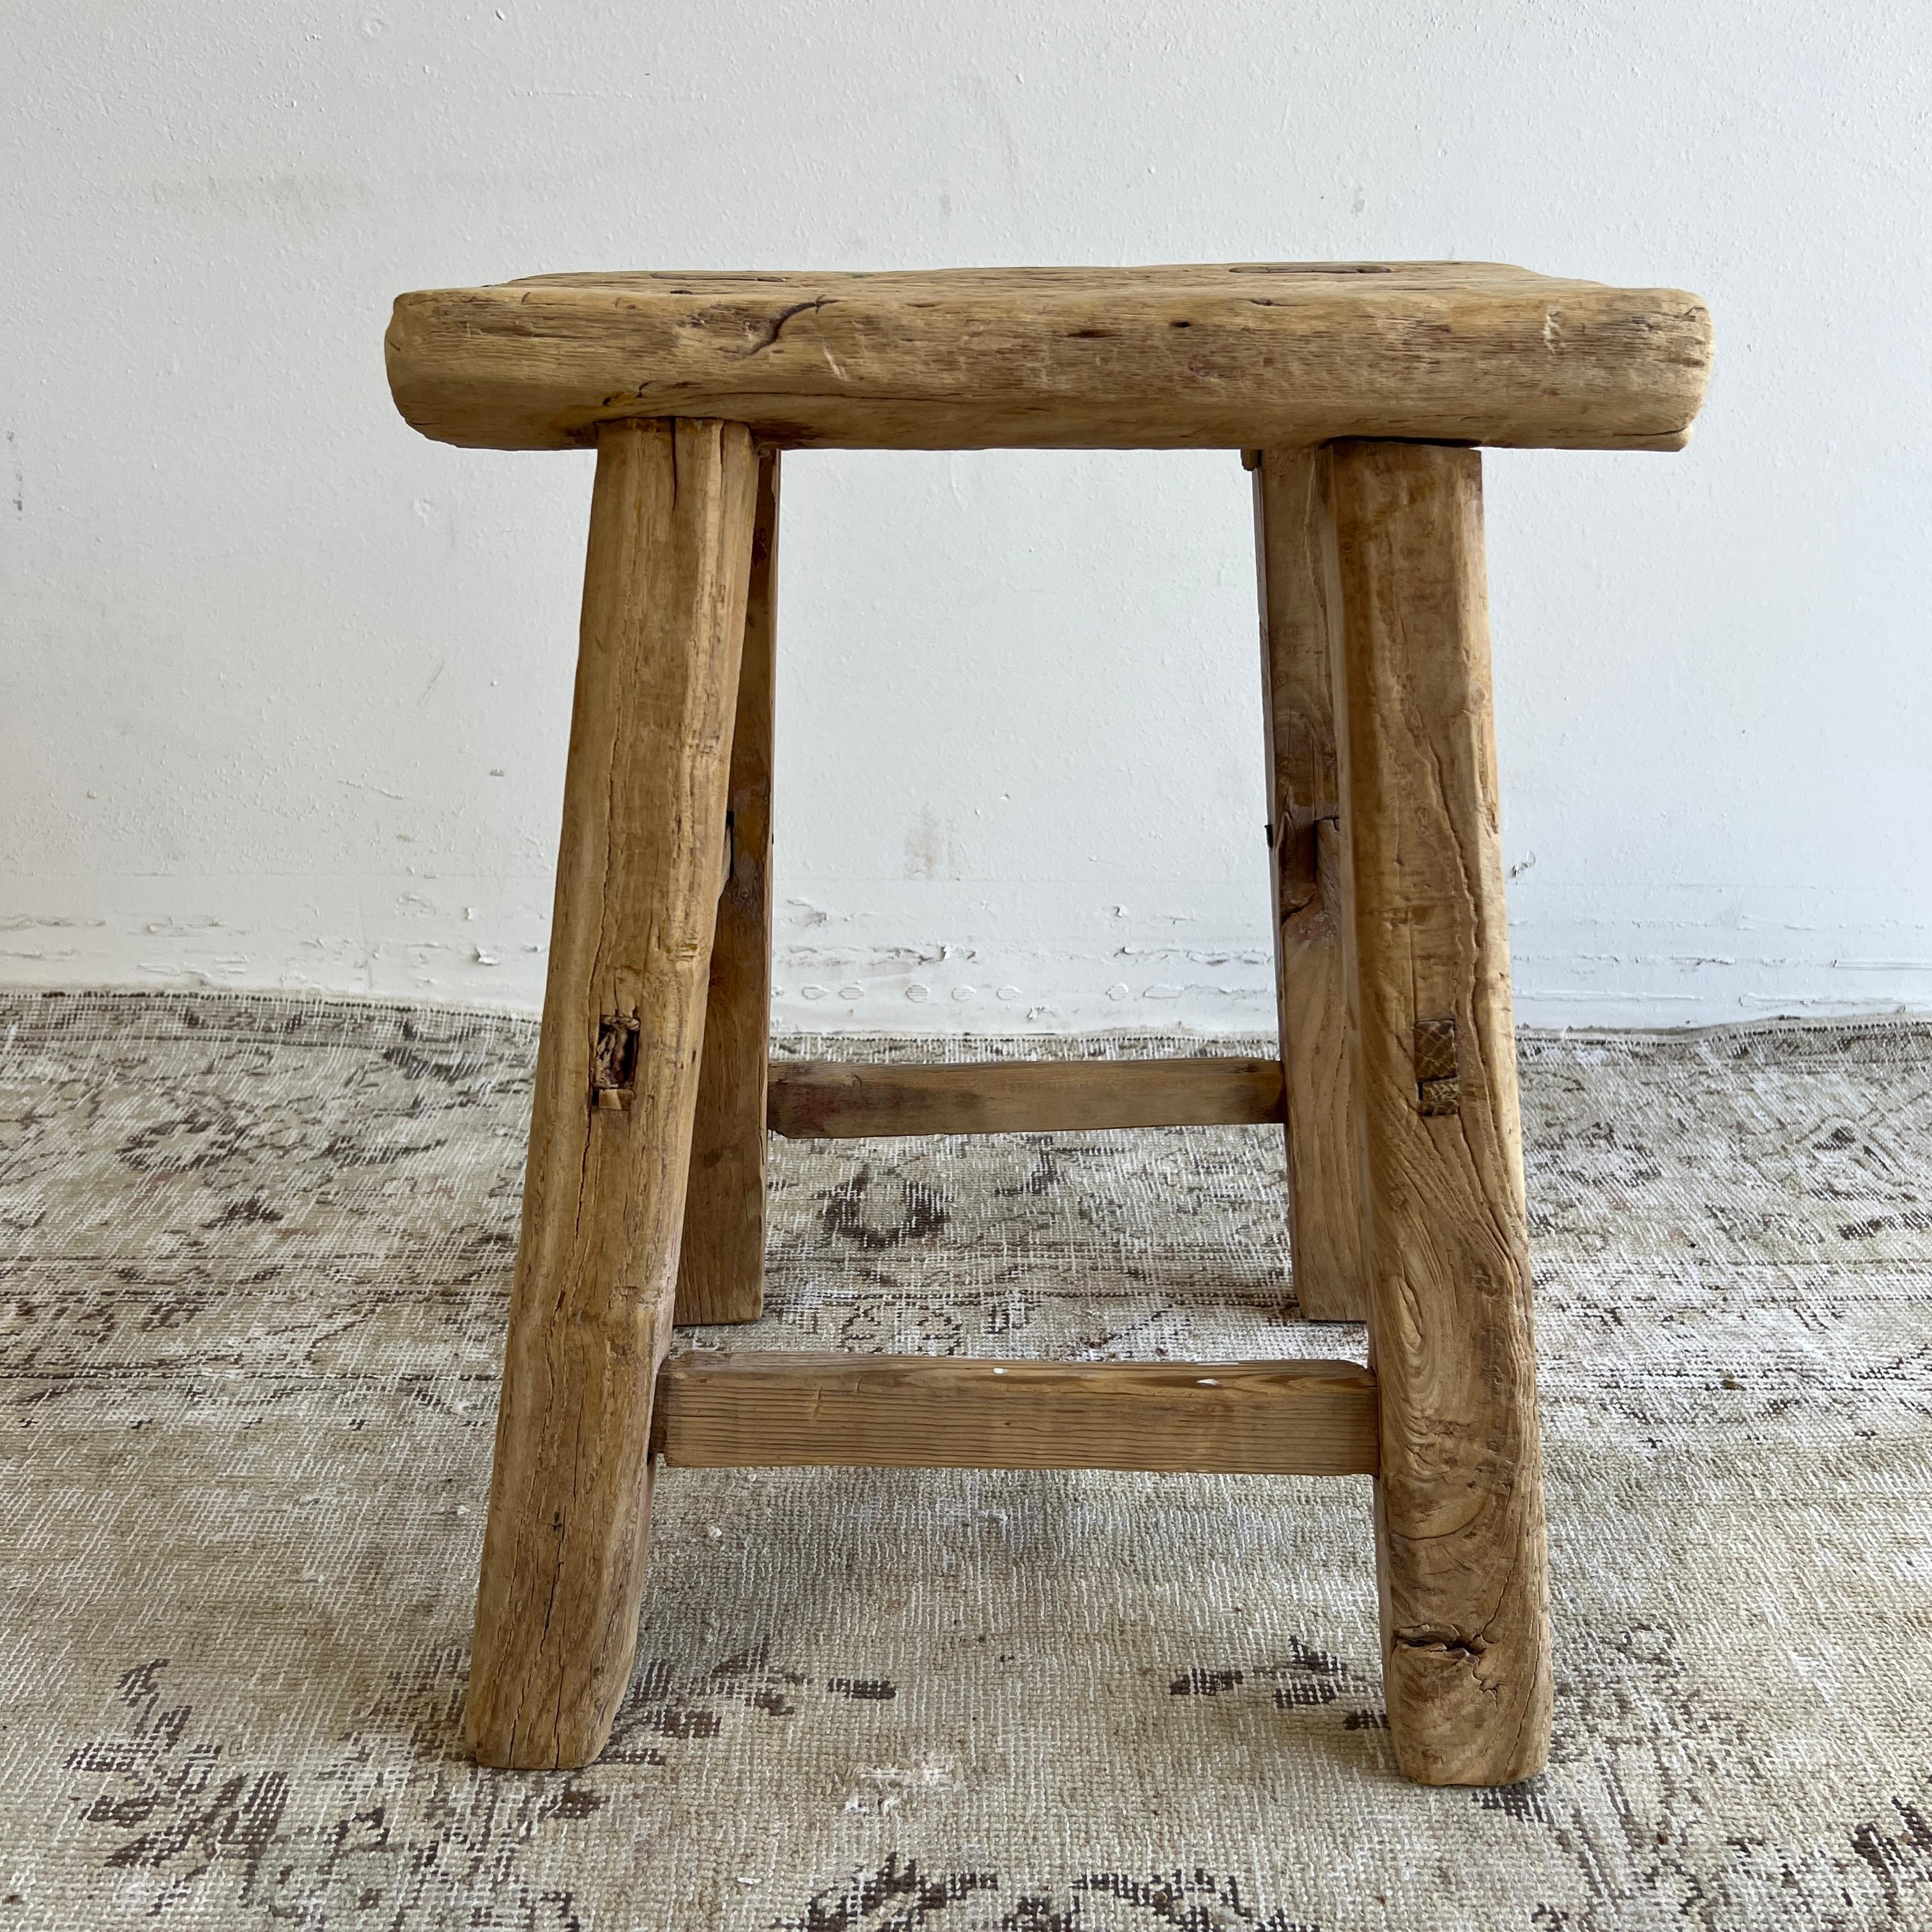 Vintage Antique elm wood stool These are the real vintage antique elm wood stools! Beautiful antique patina, with weathering and age, these are solid and sturdy ready for daily use, use as a table, stool, drink table, they are great for any space.